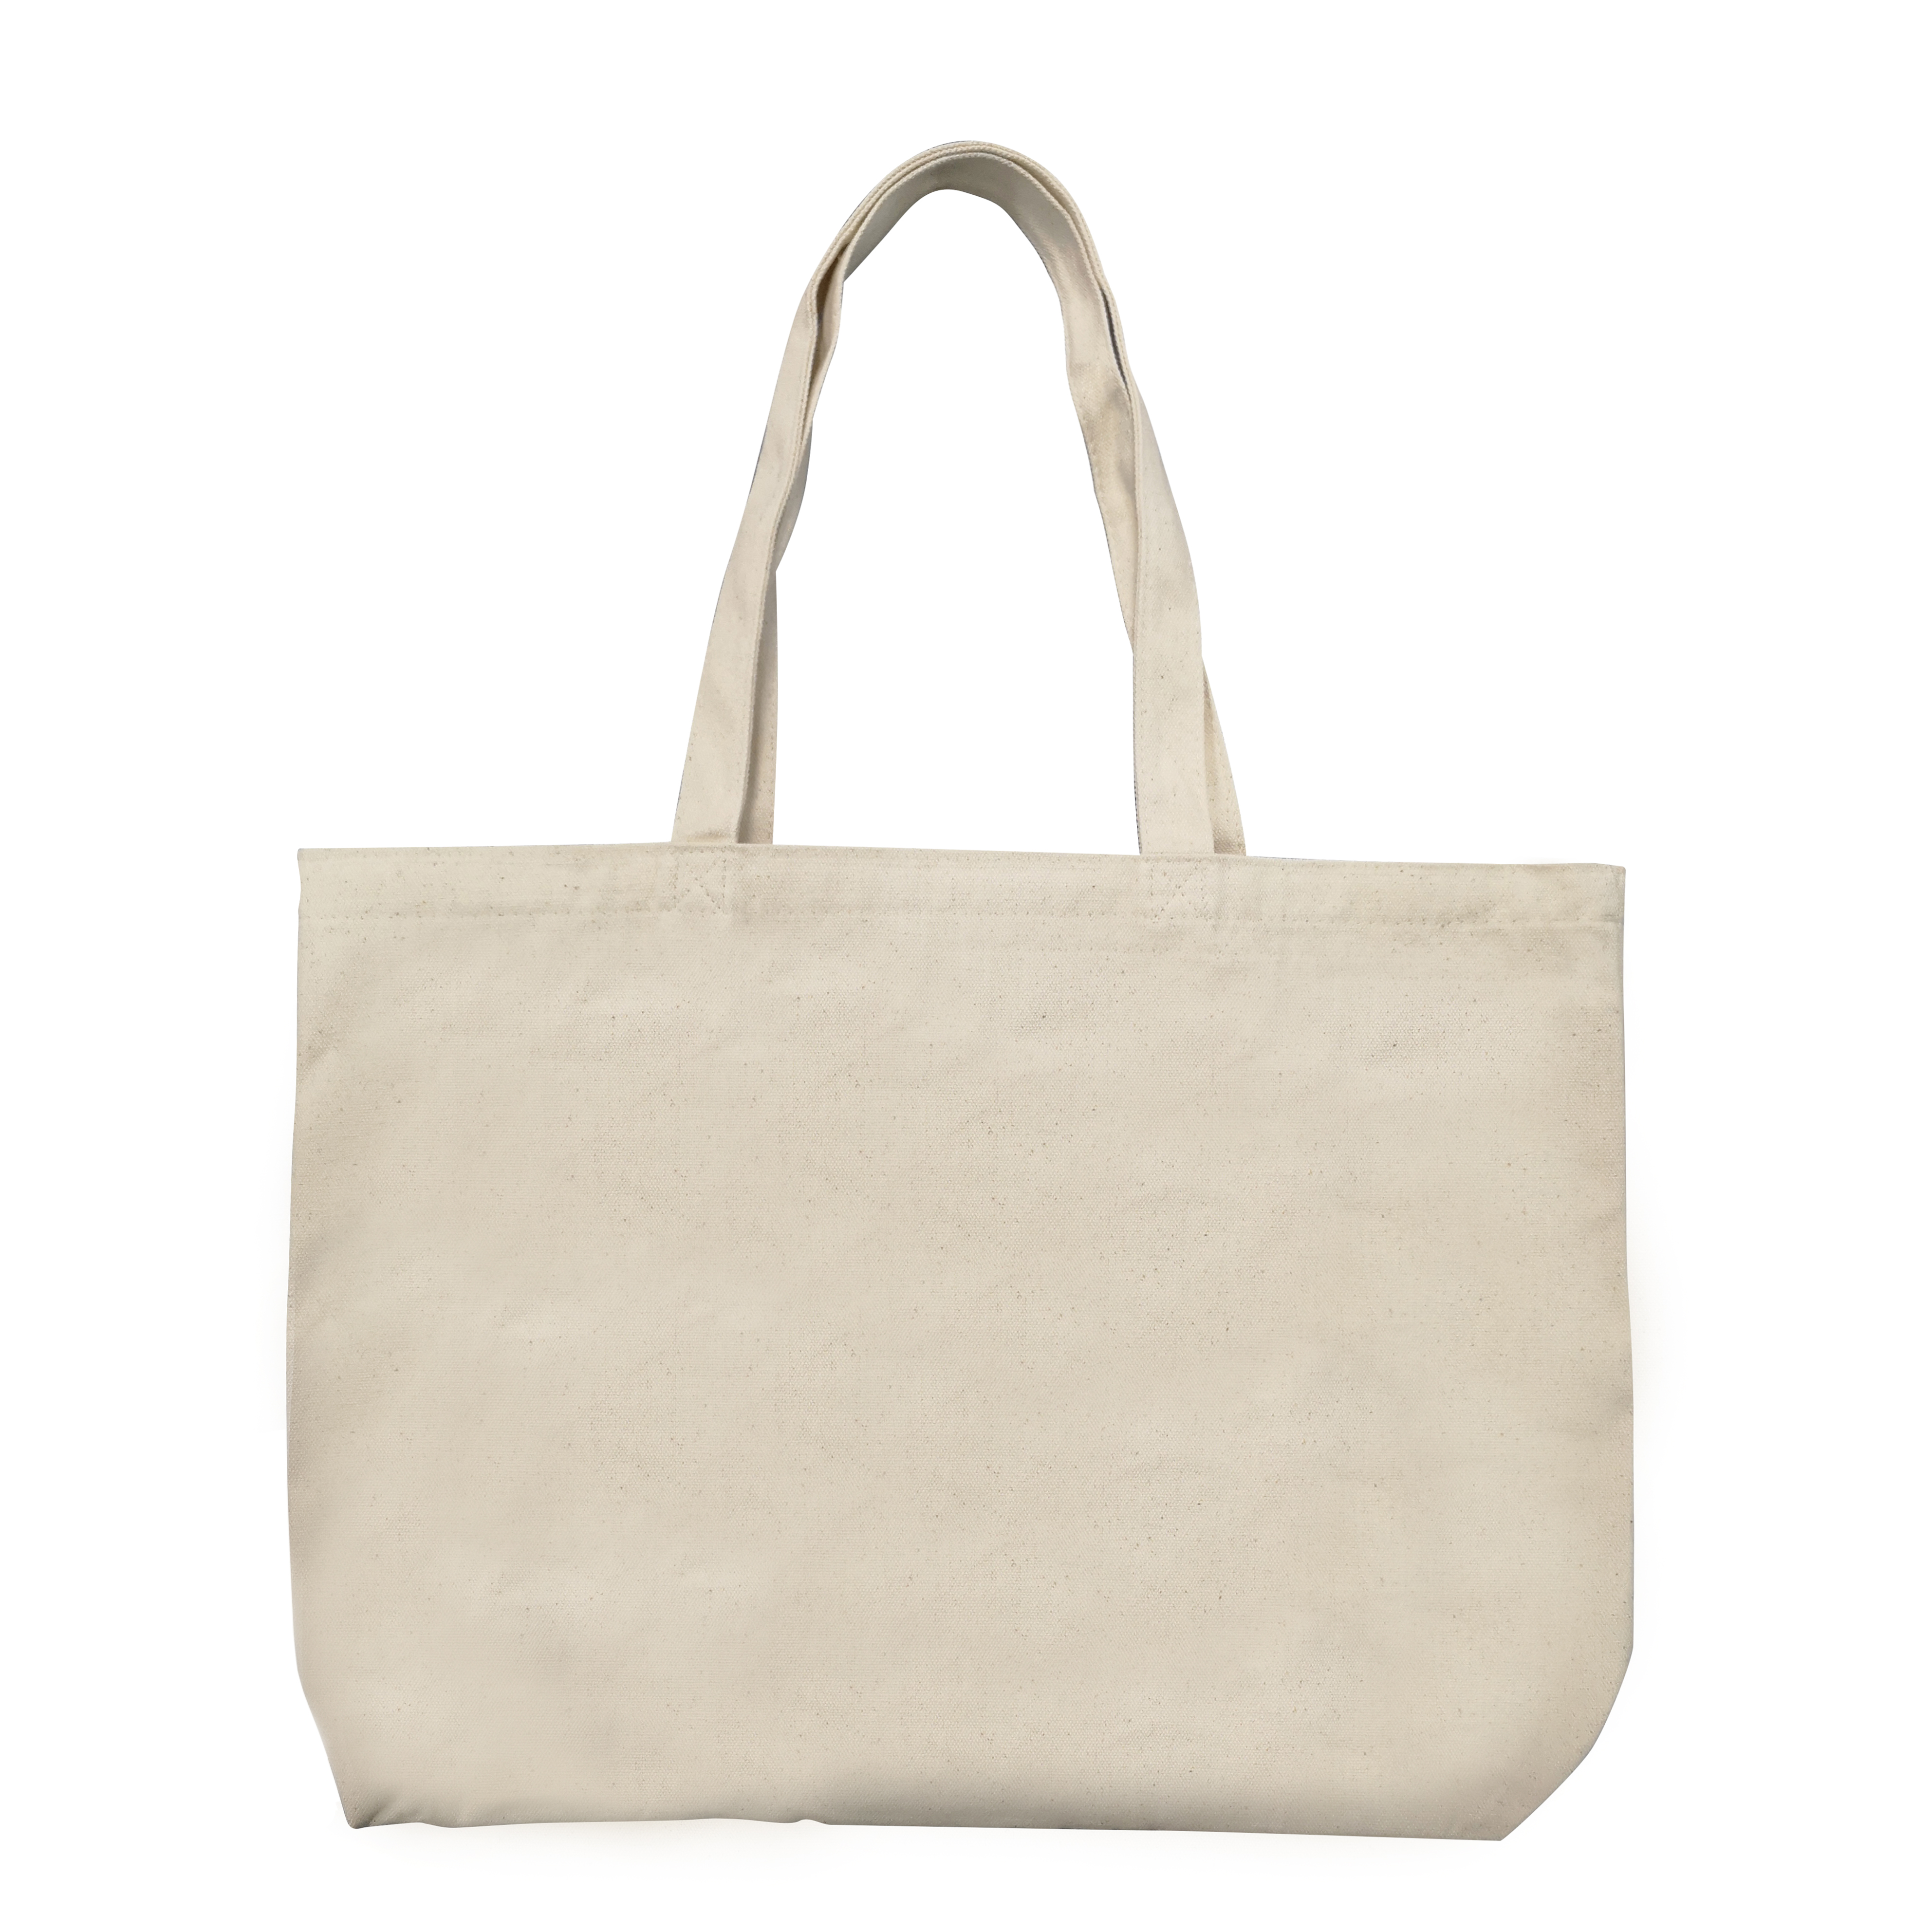 Why Cotton Tote Bag Printing Is So Important